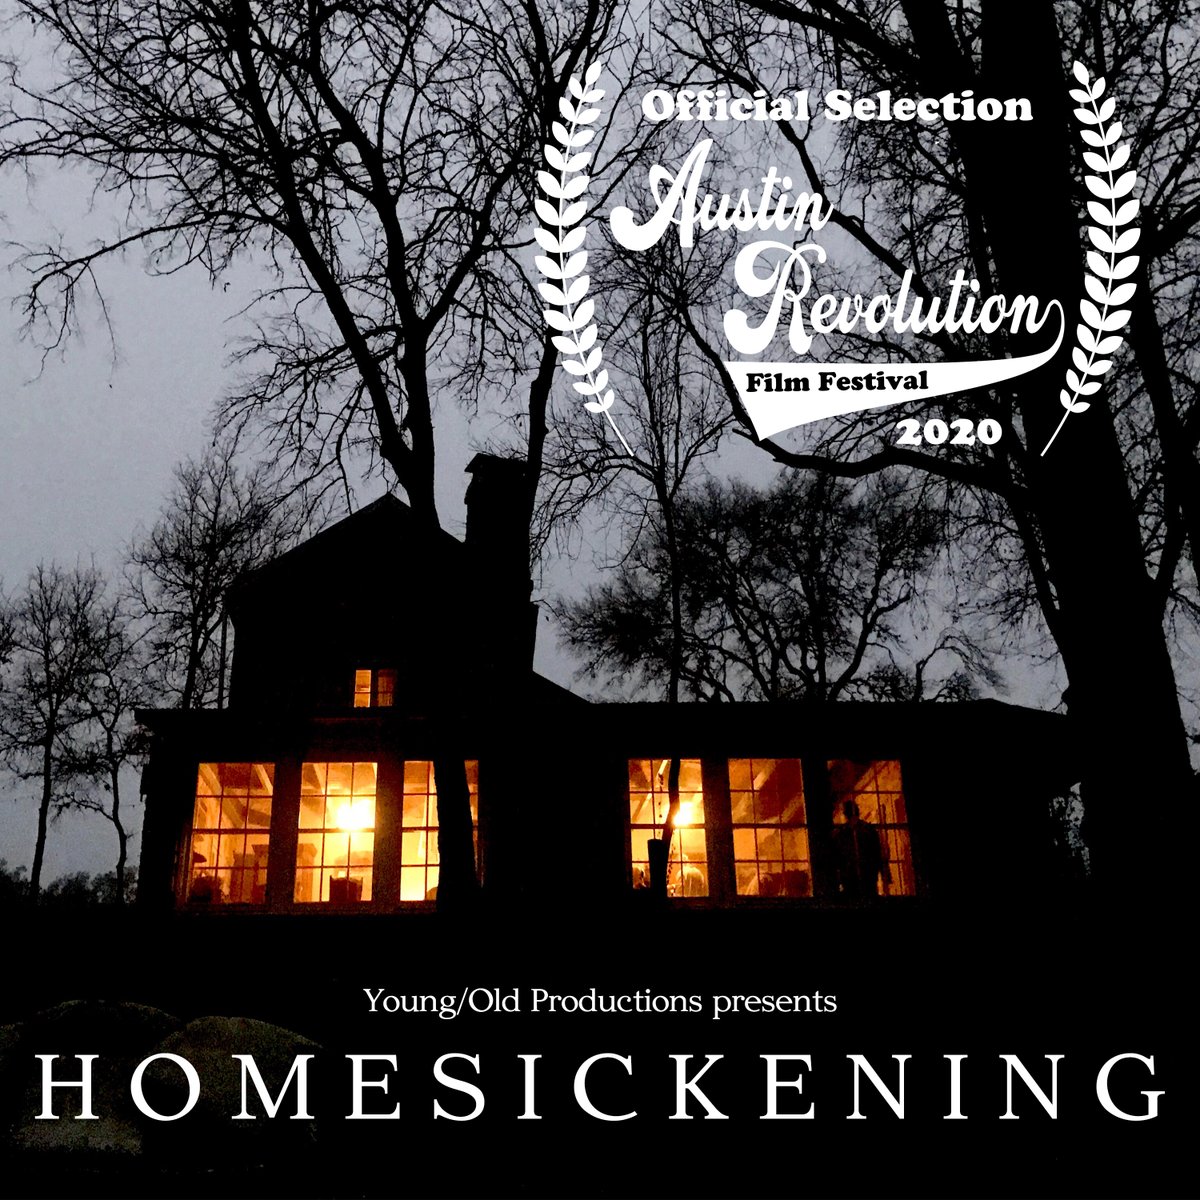 Excited to announce that our short film HOMESICKENING will be playing Austin Revolution Film Festival in March 2021! #ARFF9th